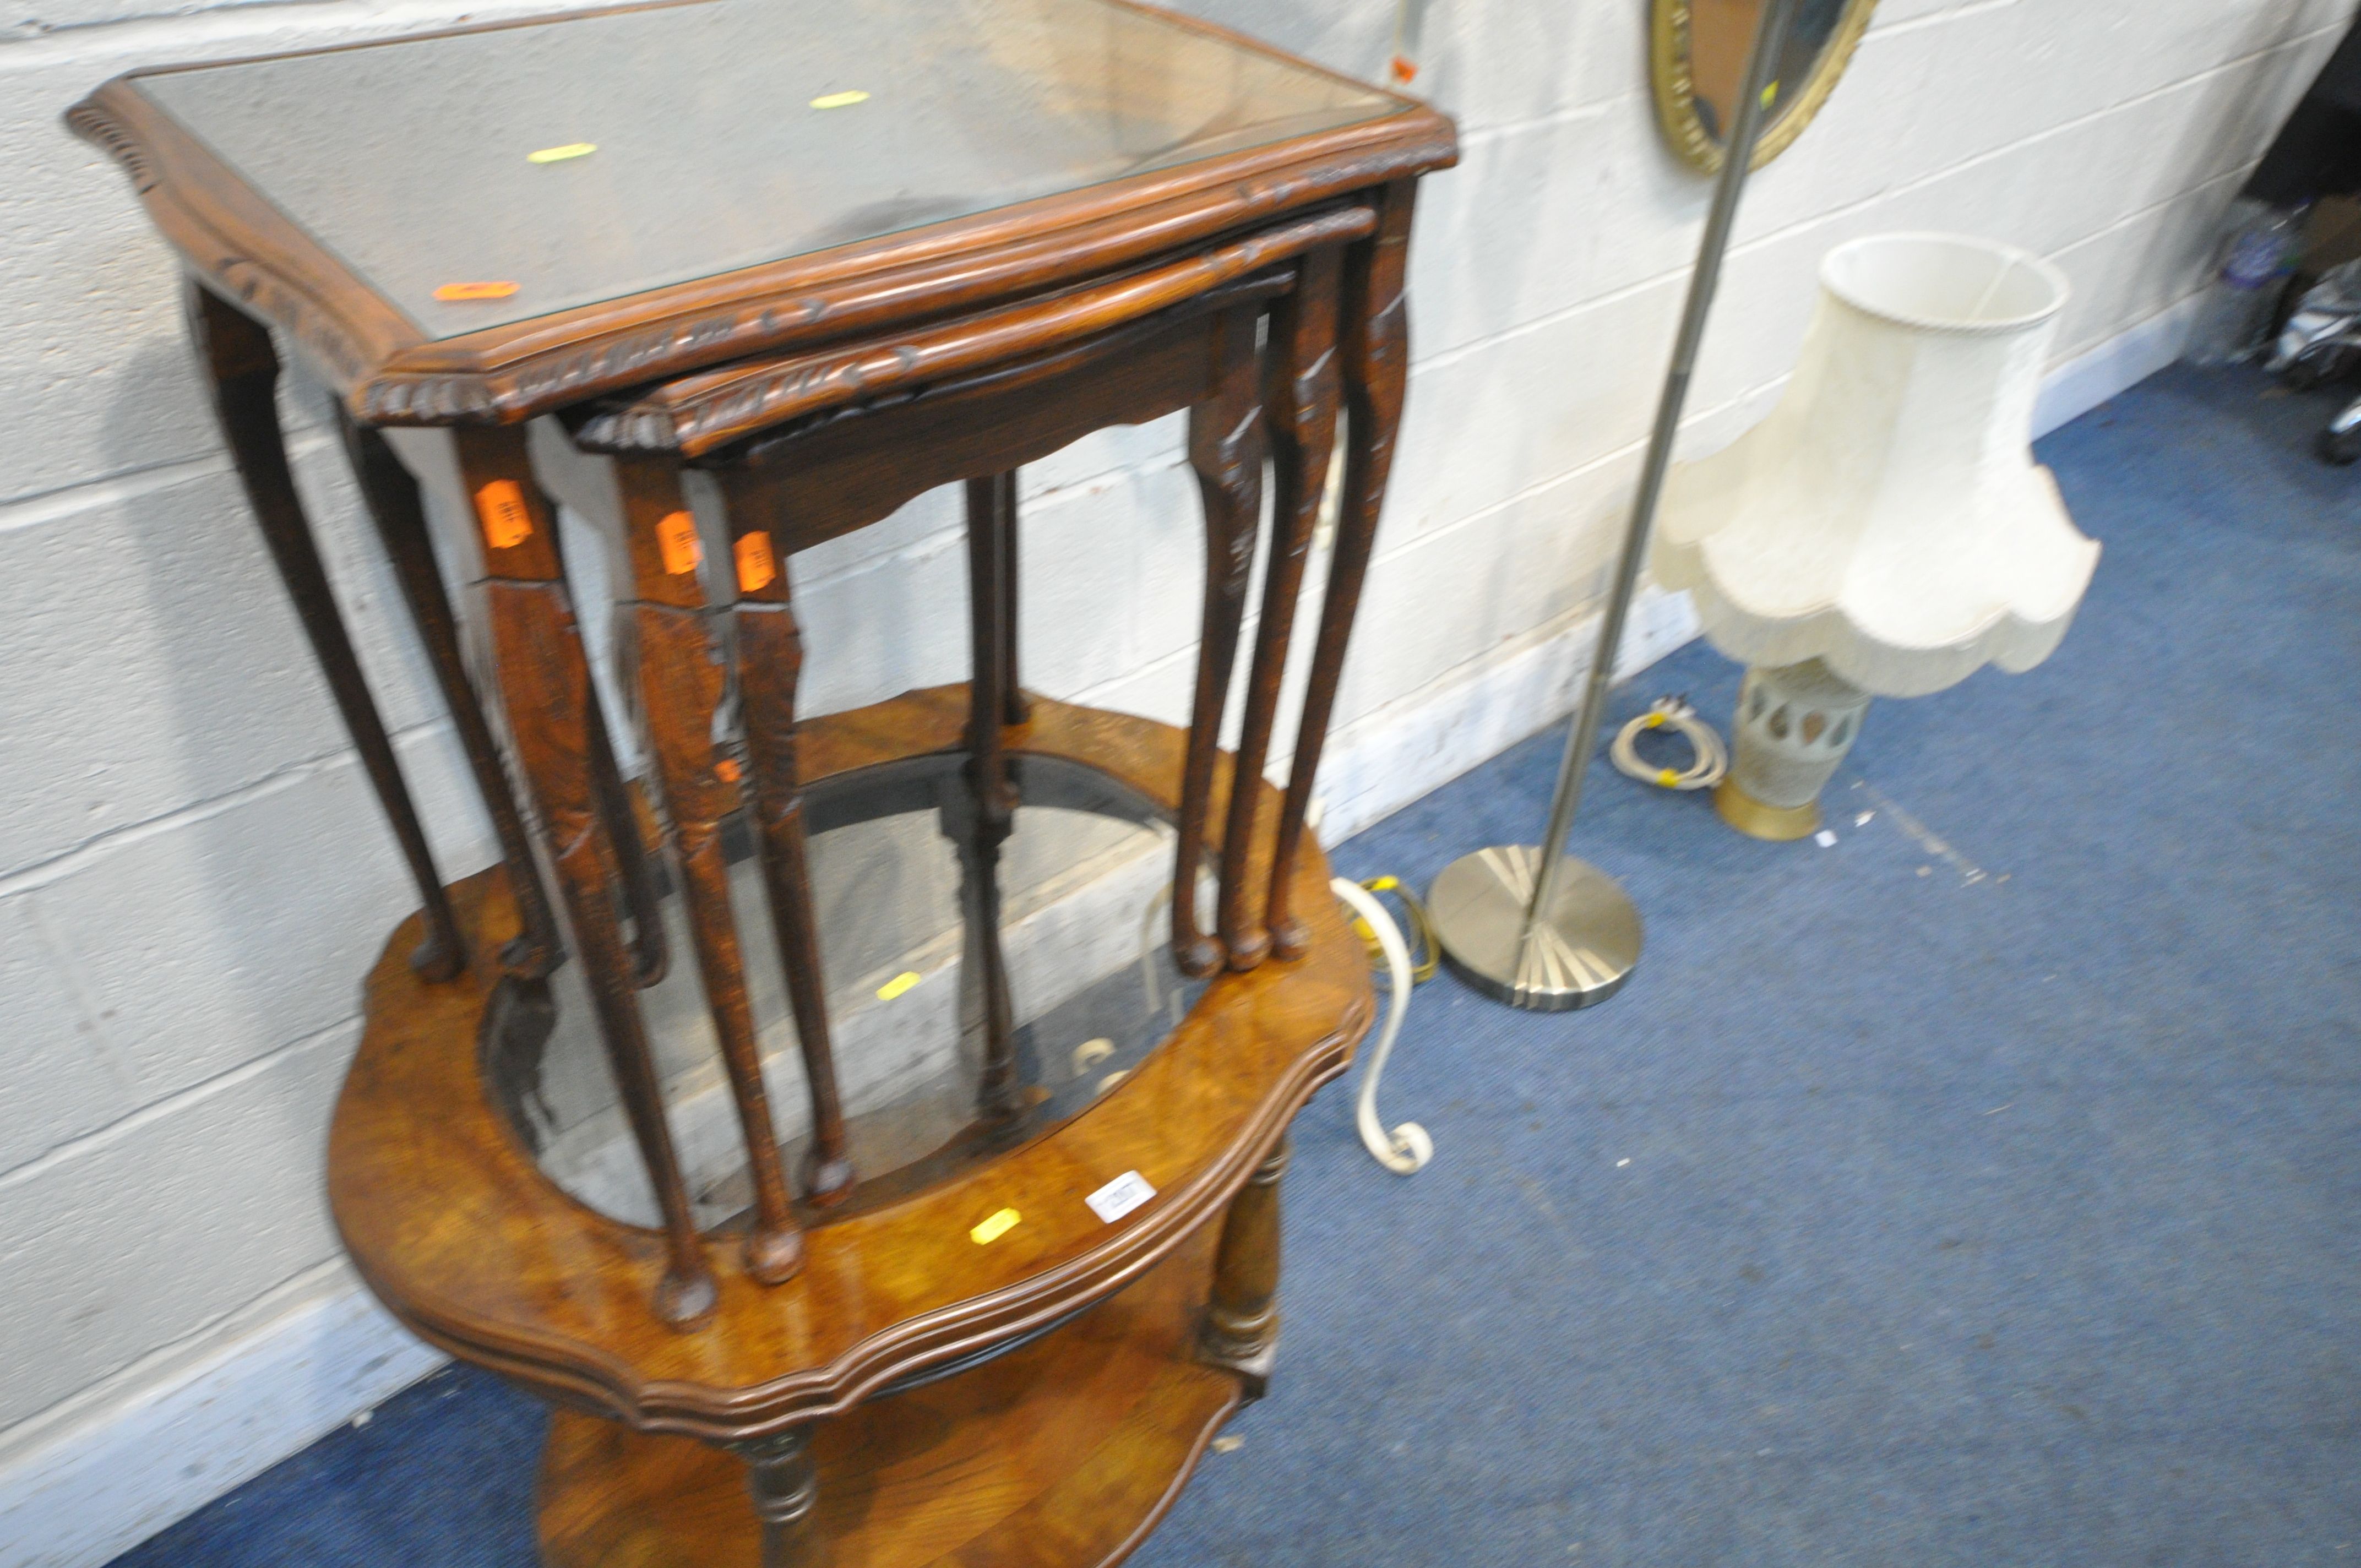 A SELECTION OF OCCASIONAL FURNITURE, to include a walnut occasional table with a glass centre, - Image 2 of 4